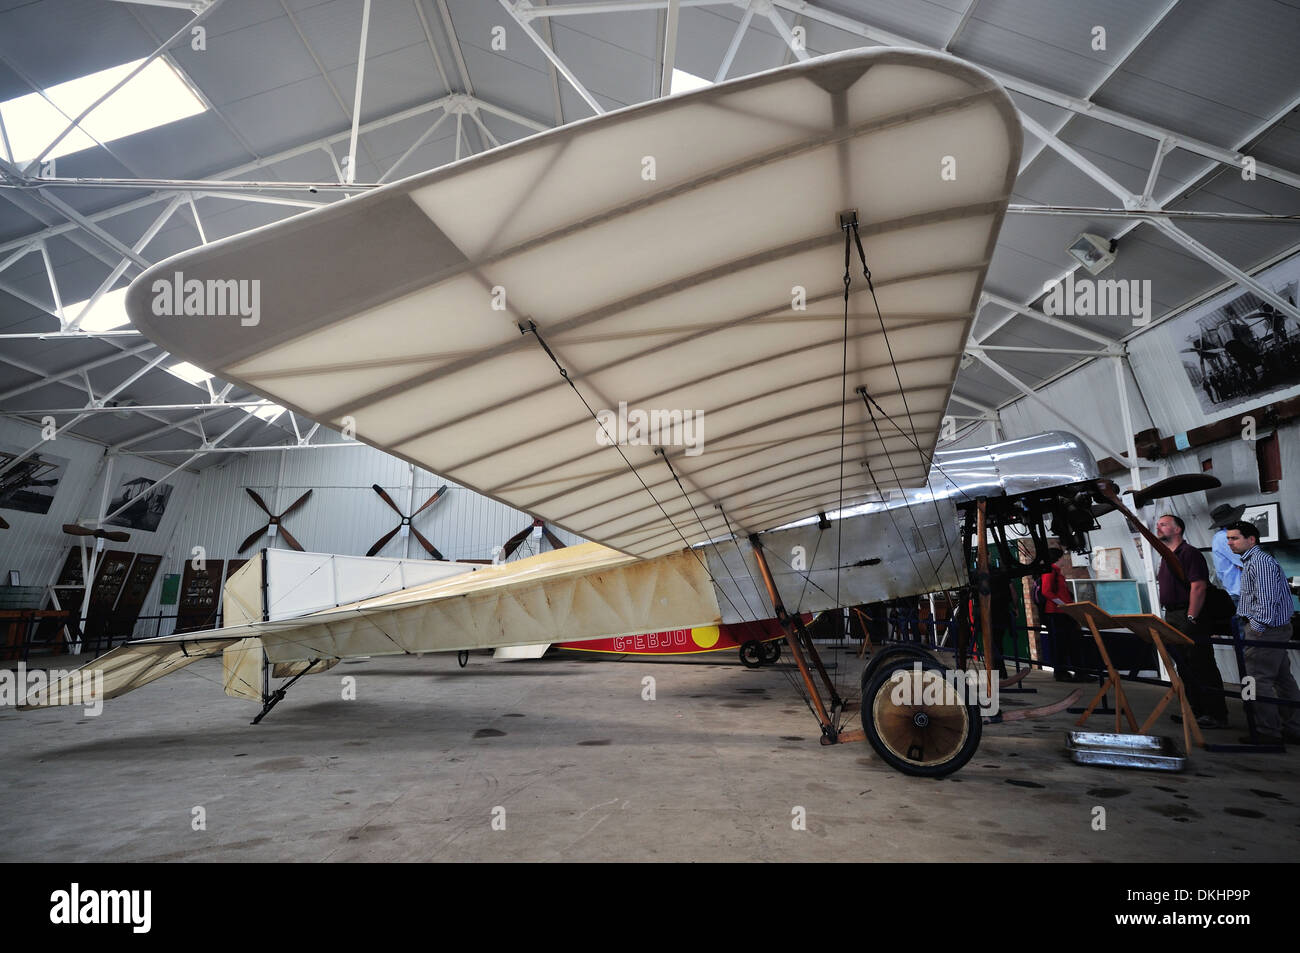 Blackburn type D monoplane in the hanger.Owned by the Shuttleworth collection.Britain's oldest airworthy aircraft.Built in 1912. Stock Photo